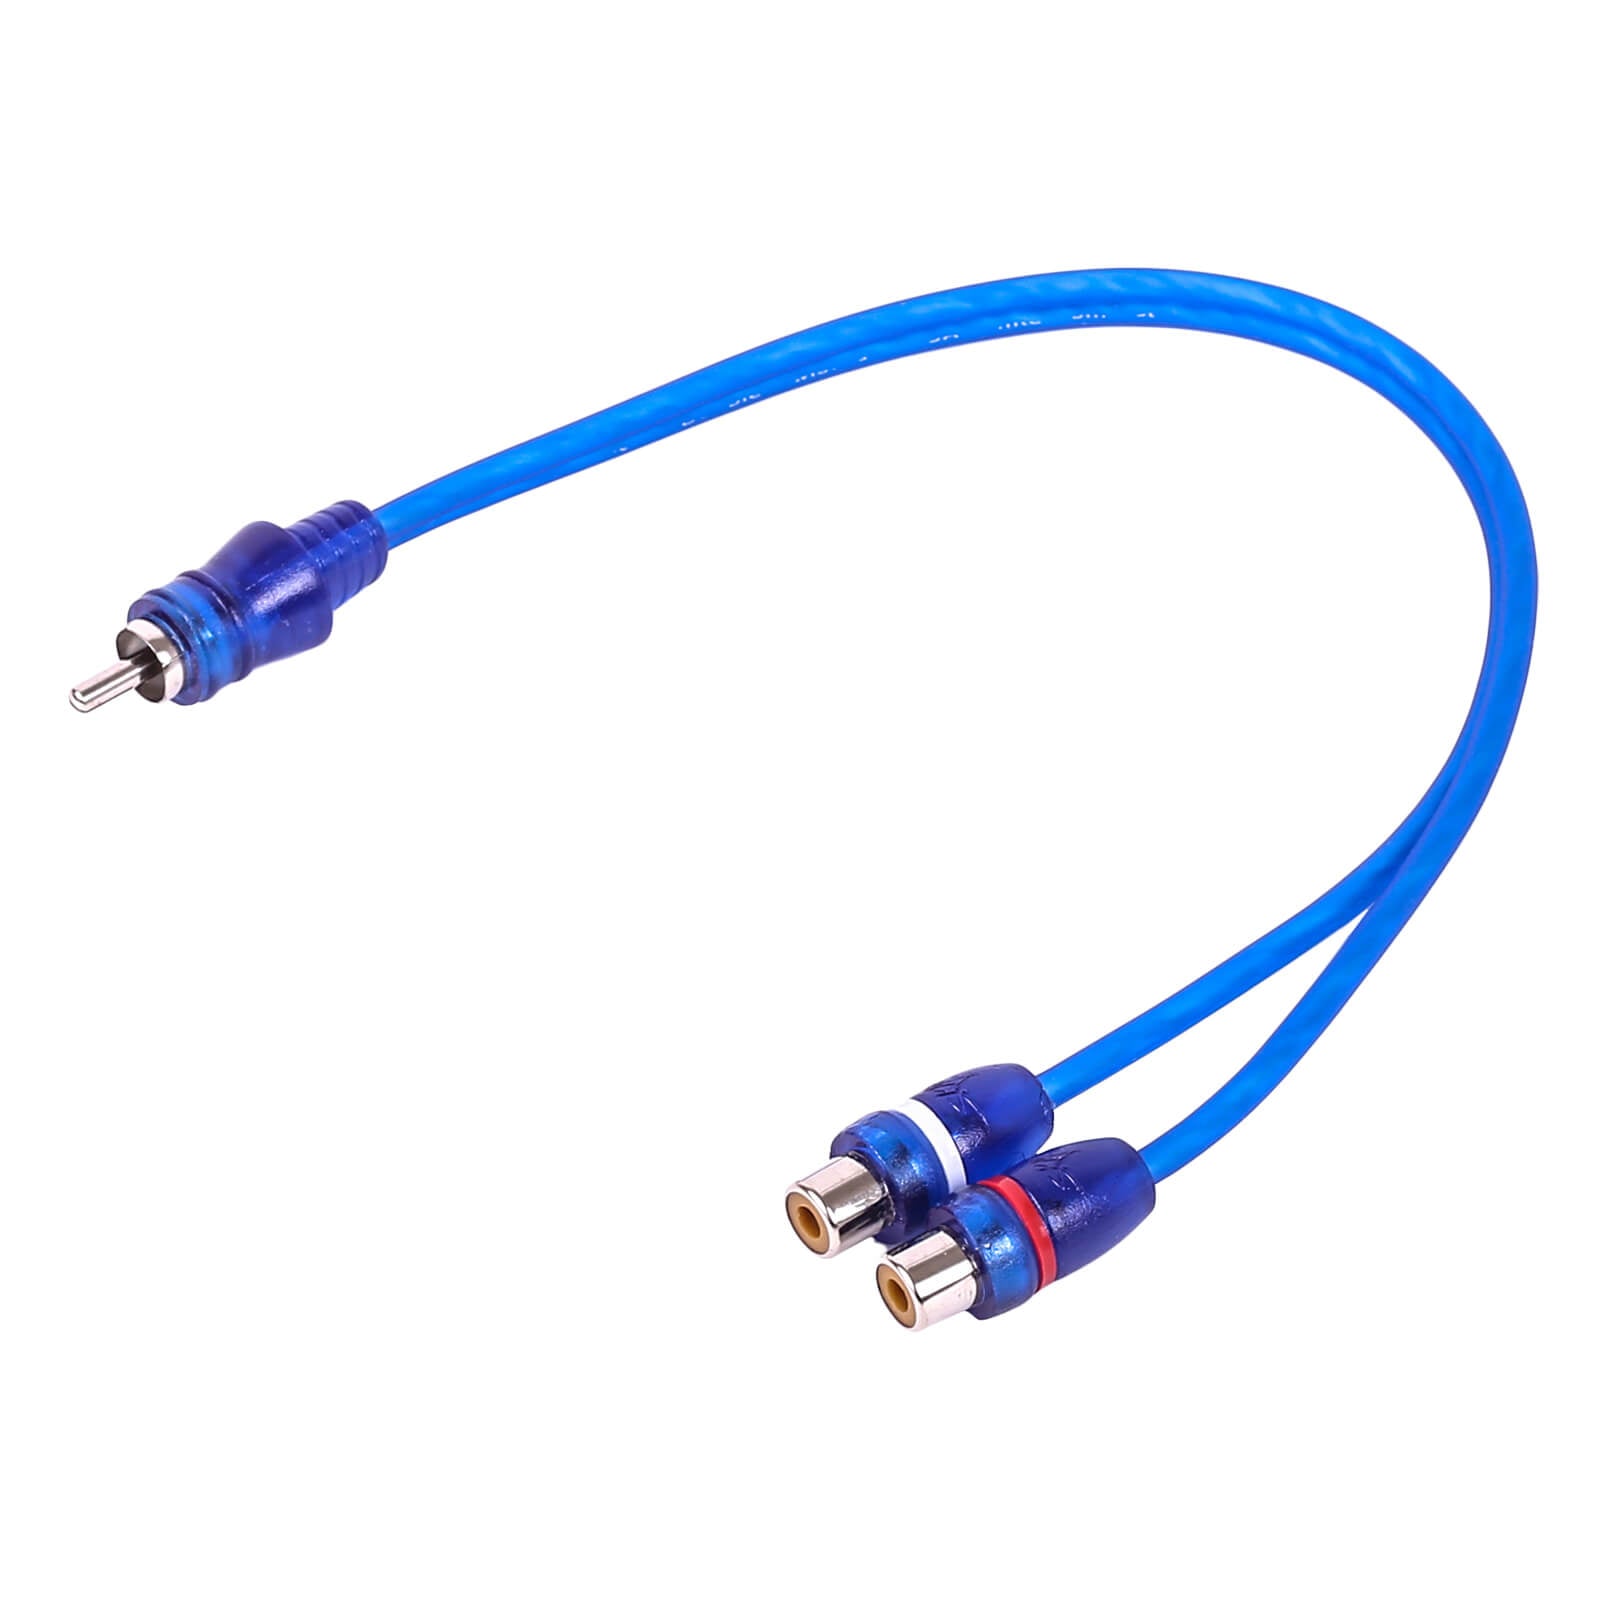 1-Male to 2-Female RCA Y-Adapter (1 FT) Interconnect Cable (SKARRCA-1M2F) - Main Image